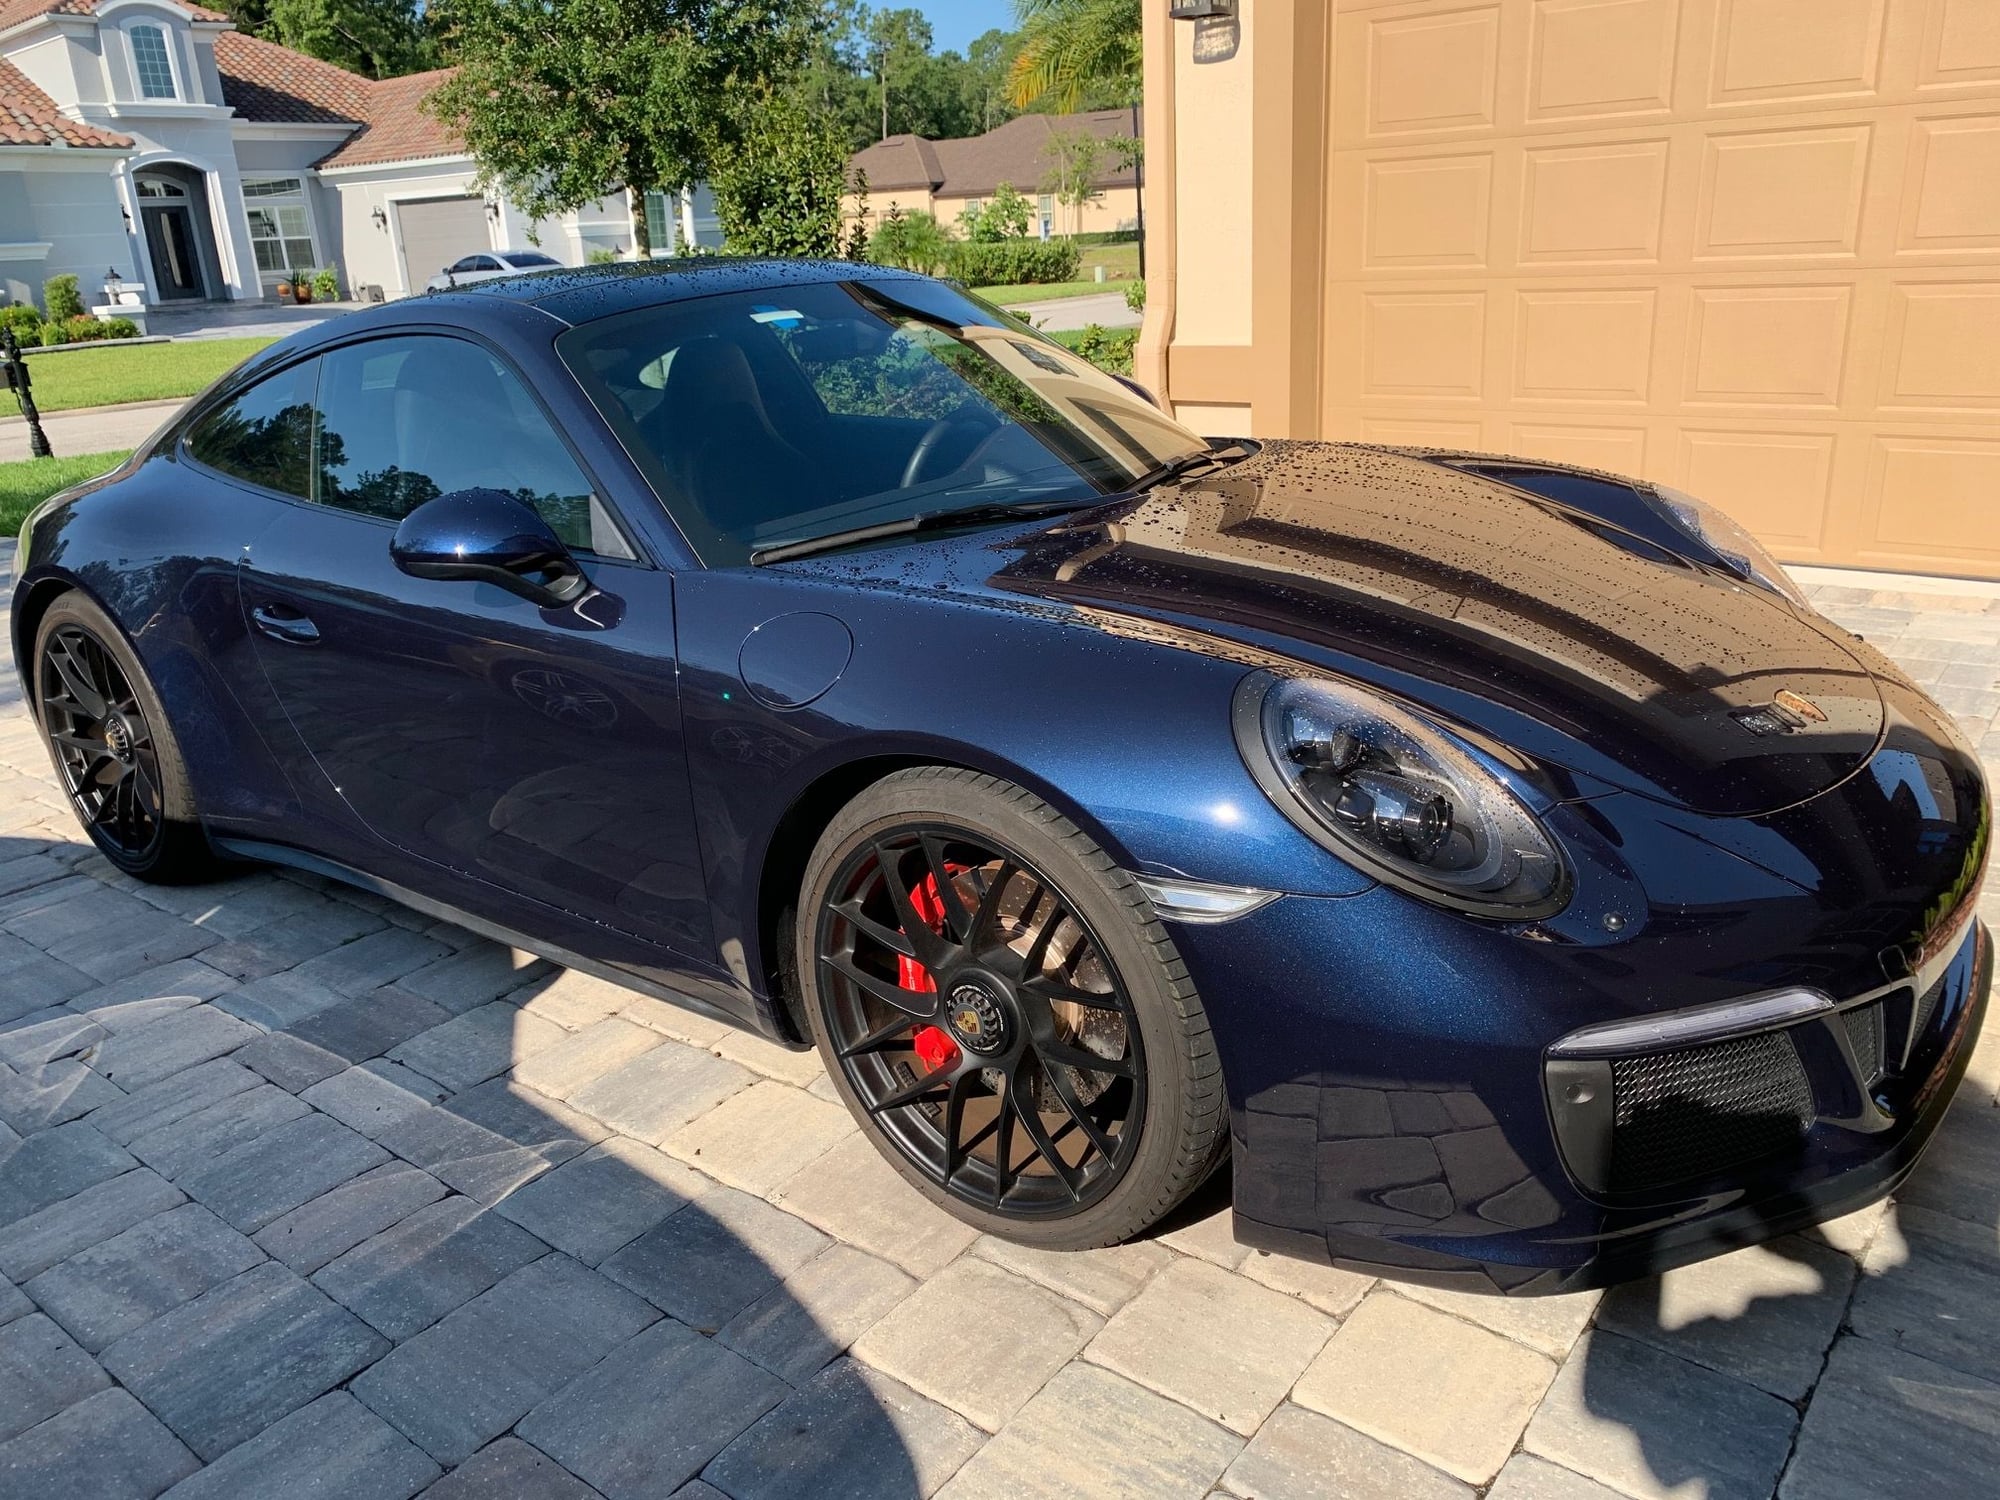 2017 Porsche 911 - 2017 Porsche Carrera 911 GTS - Used - VIN WP0AB2A9XHS124686 - 7,700 Miles - 6 cyl - 2WD - Automatic - Coupe - Blue - St Johns, FL 32259, United States